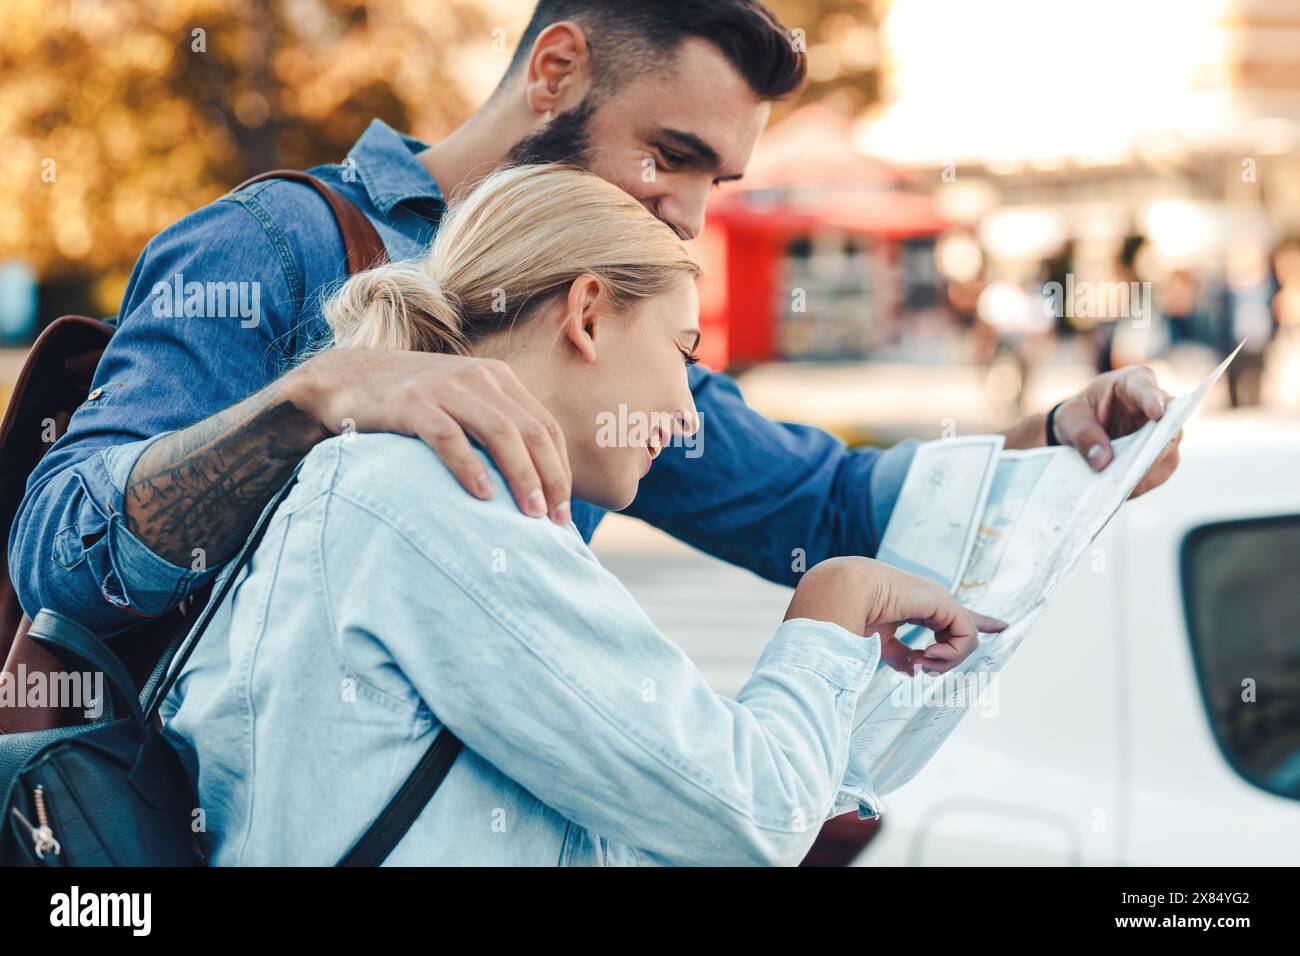 Smiling couple enjoying on vacation, young tourist having fun walking on city street looking at map for direction during the day. Stock Photo